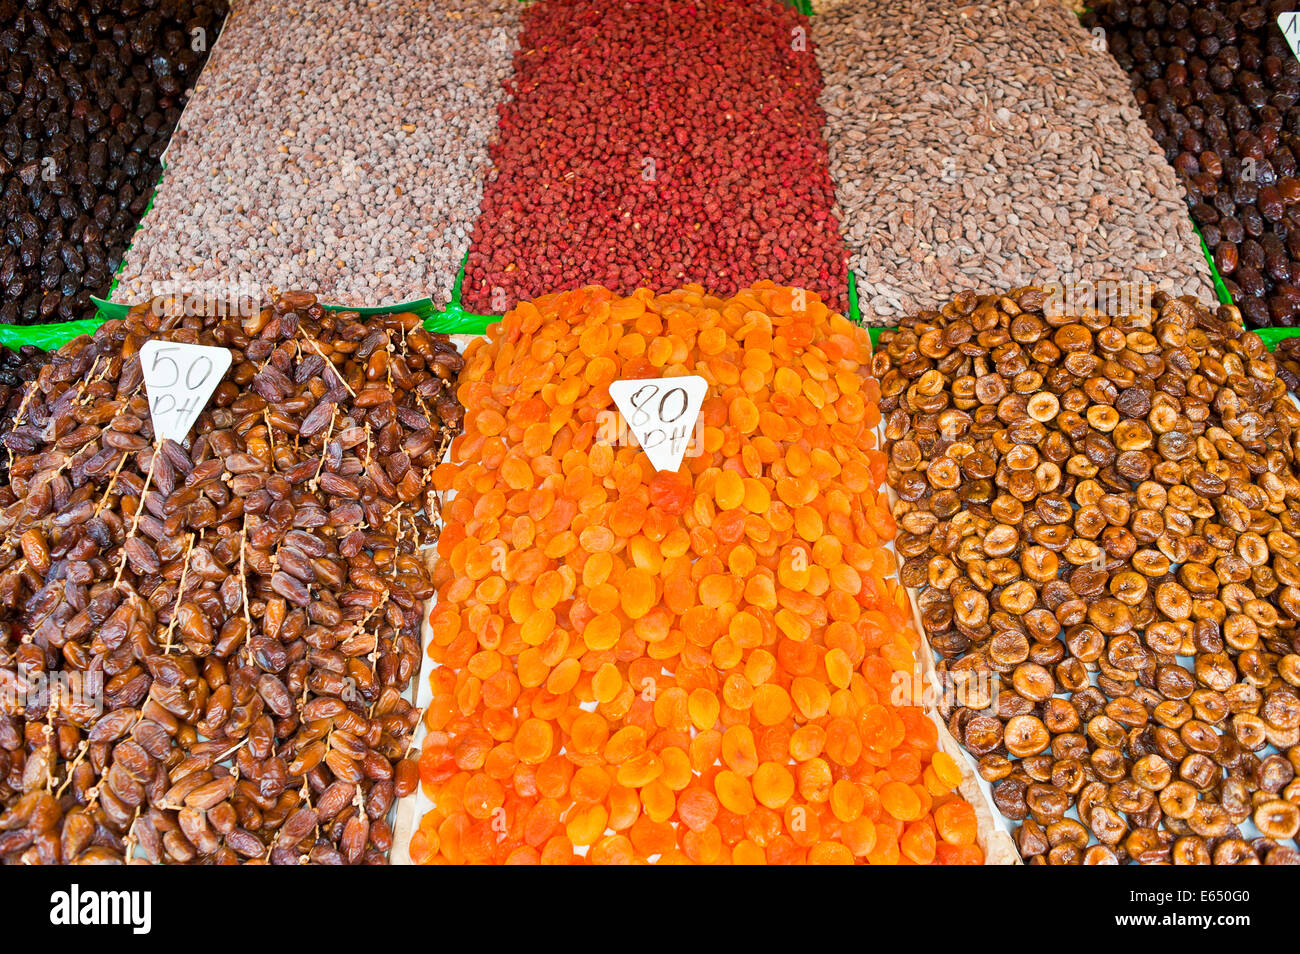 Dried apricots, dates, figs and nuts, on sale at a market stall in Djemaa el Fna square, Marrakech, Morocco Stock Photo